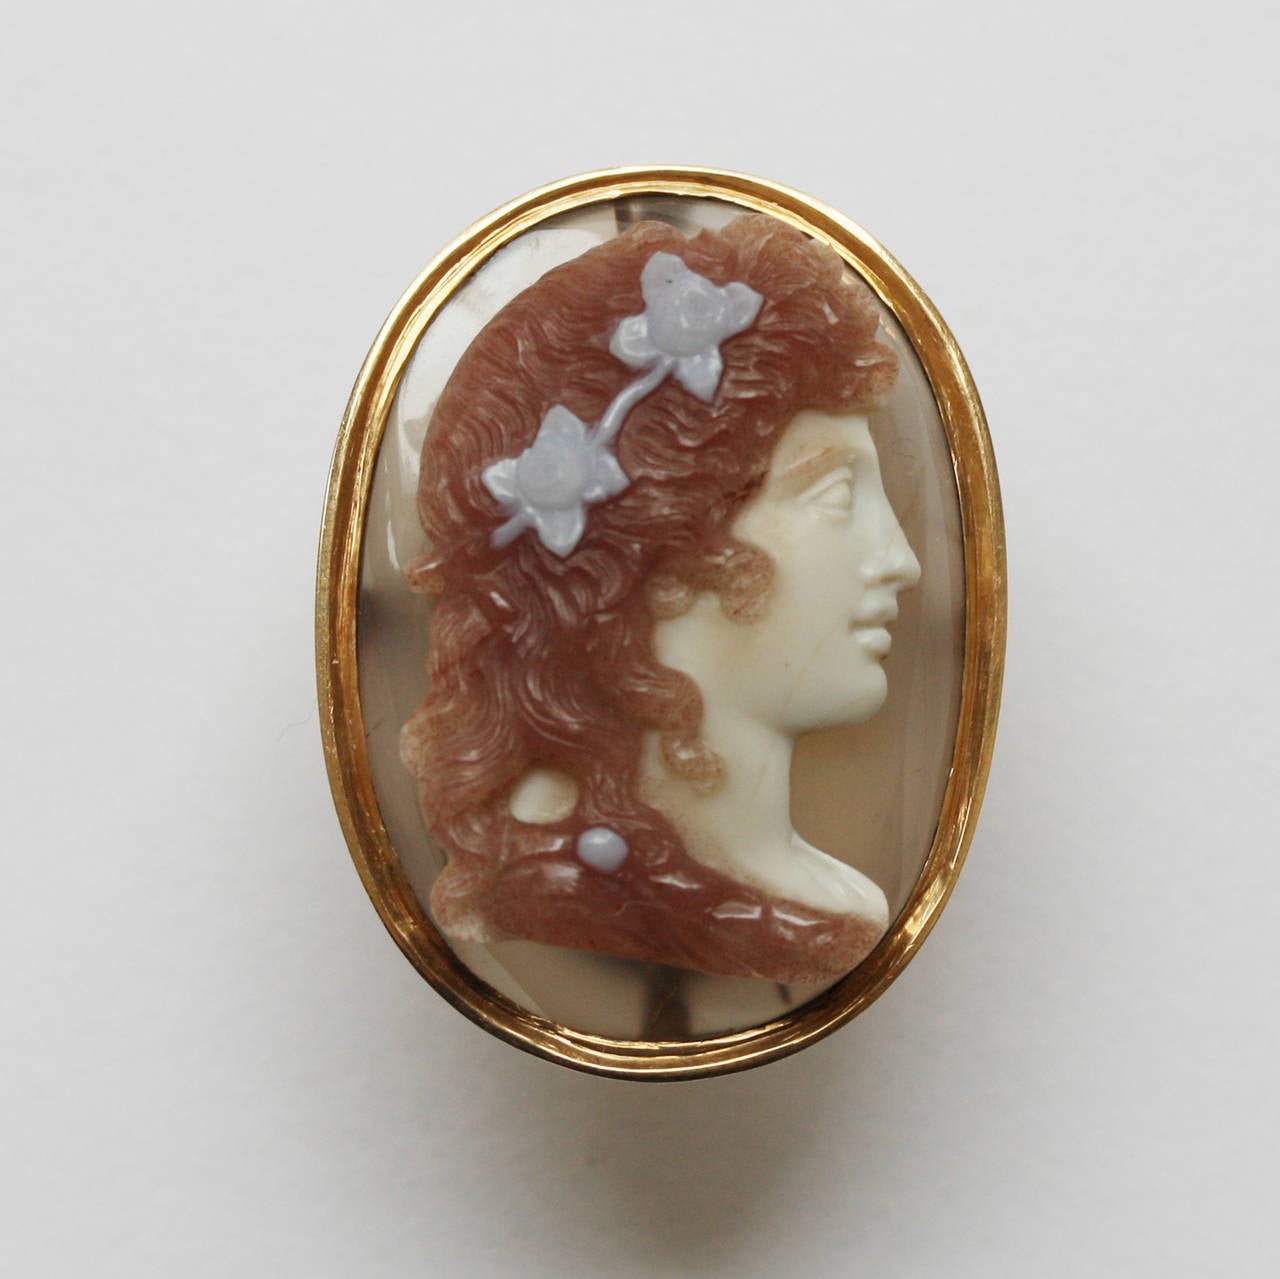 An early 19th century four layered agate cameo of the goddess Flora with flowers in her hair in a later 18 carat gold mounting.

weigth 11.3 grams
dimensions cameo: 2.6 x 1.6 cm.
ring size: 17 mm. 6.5 US